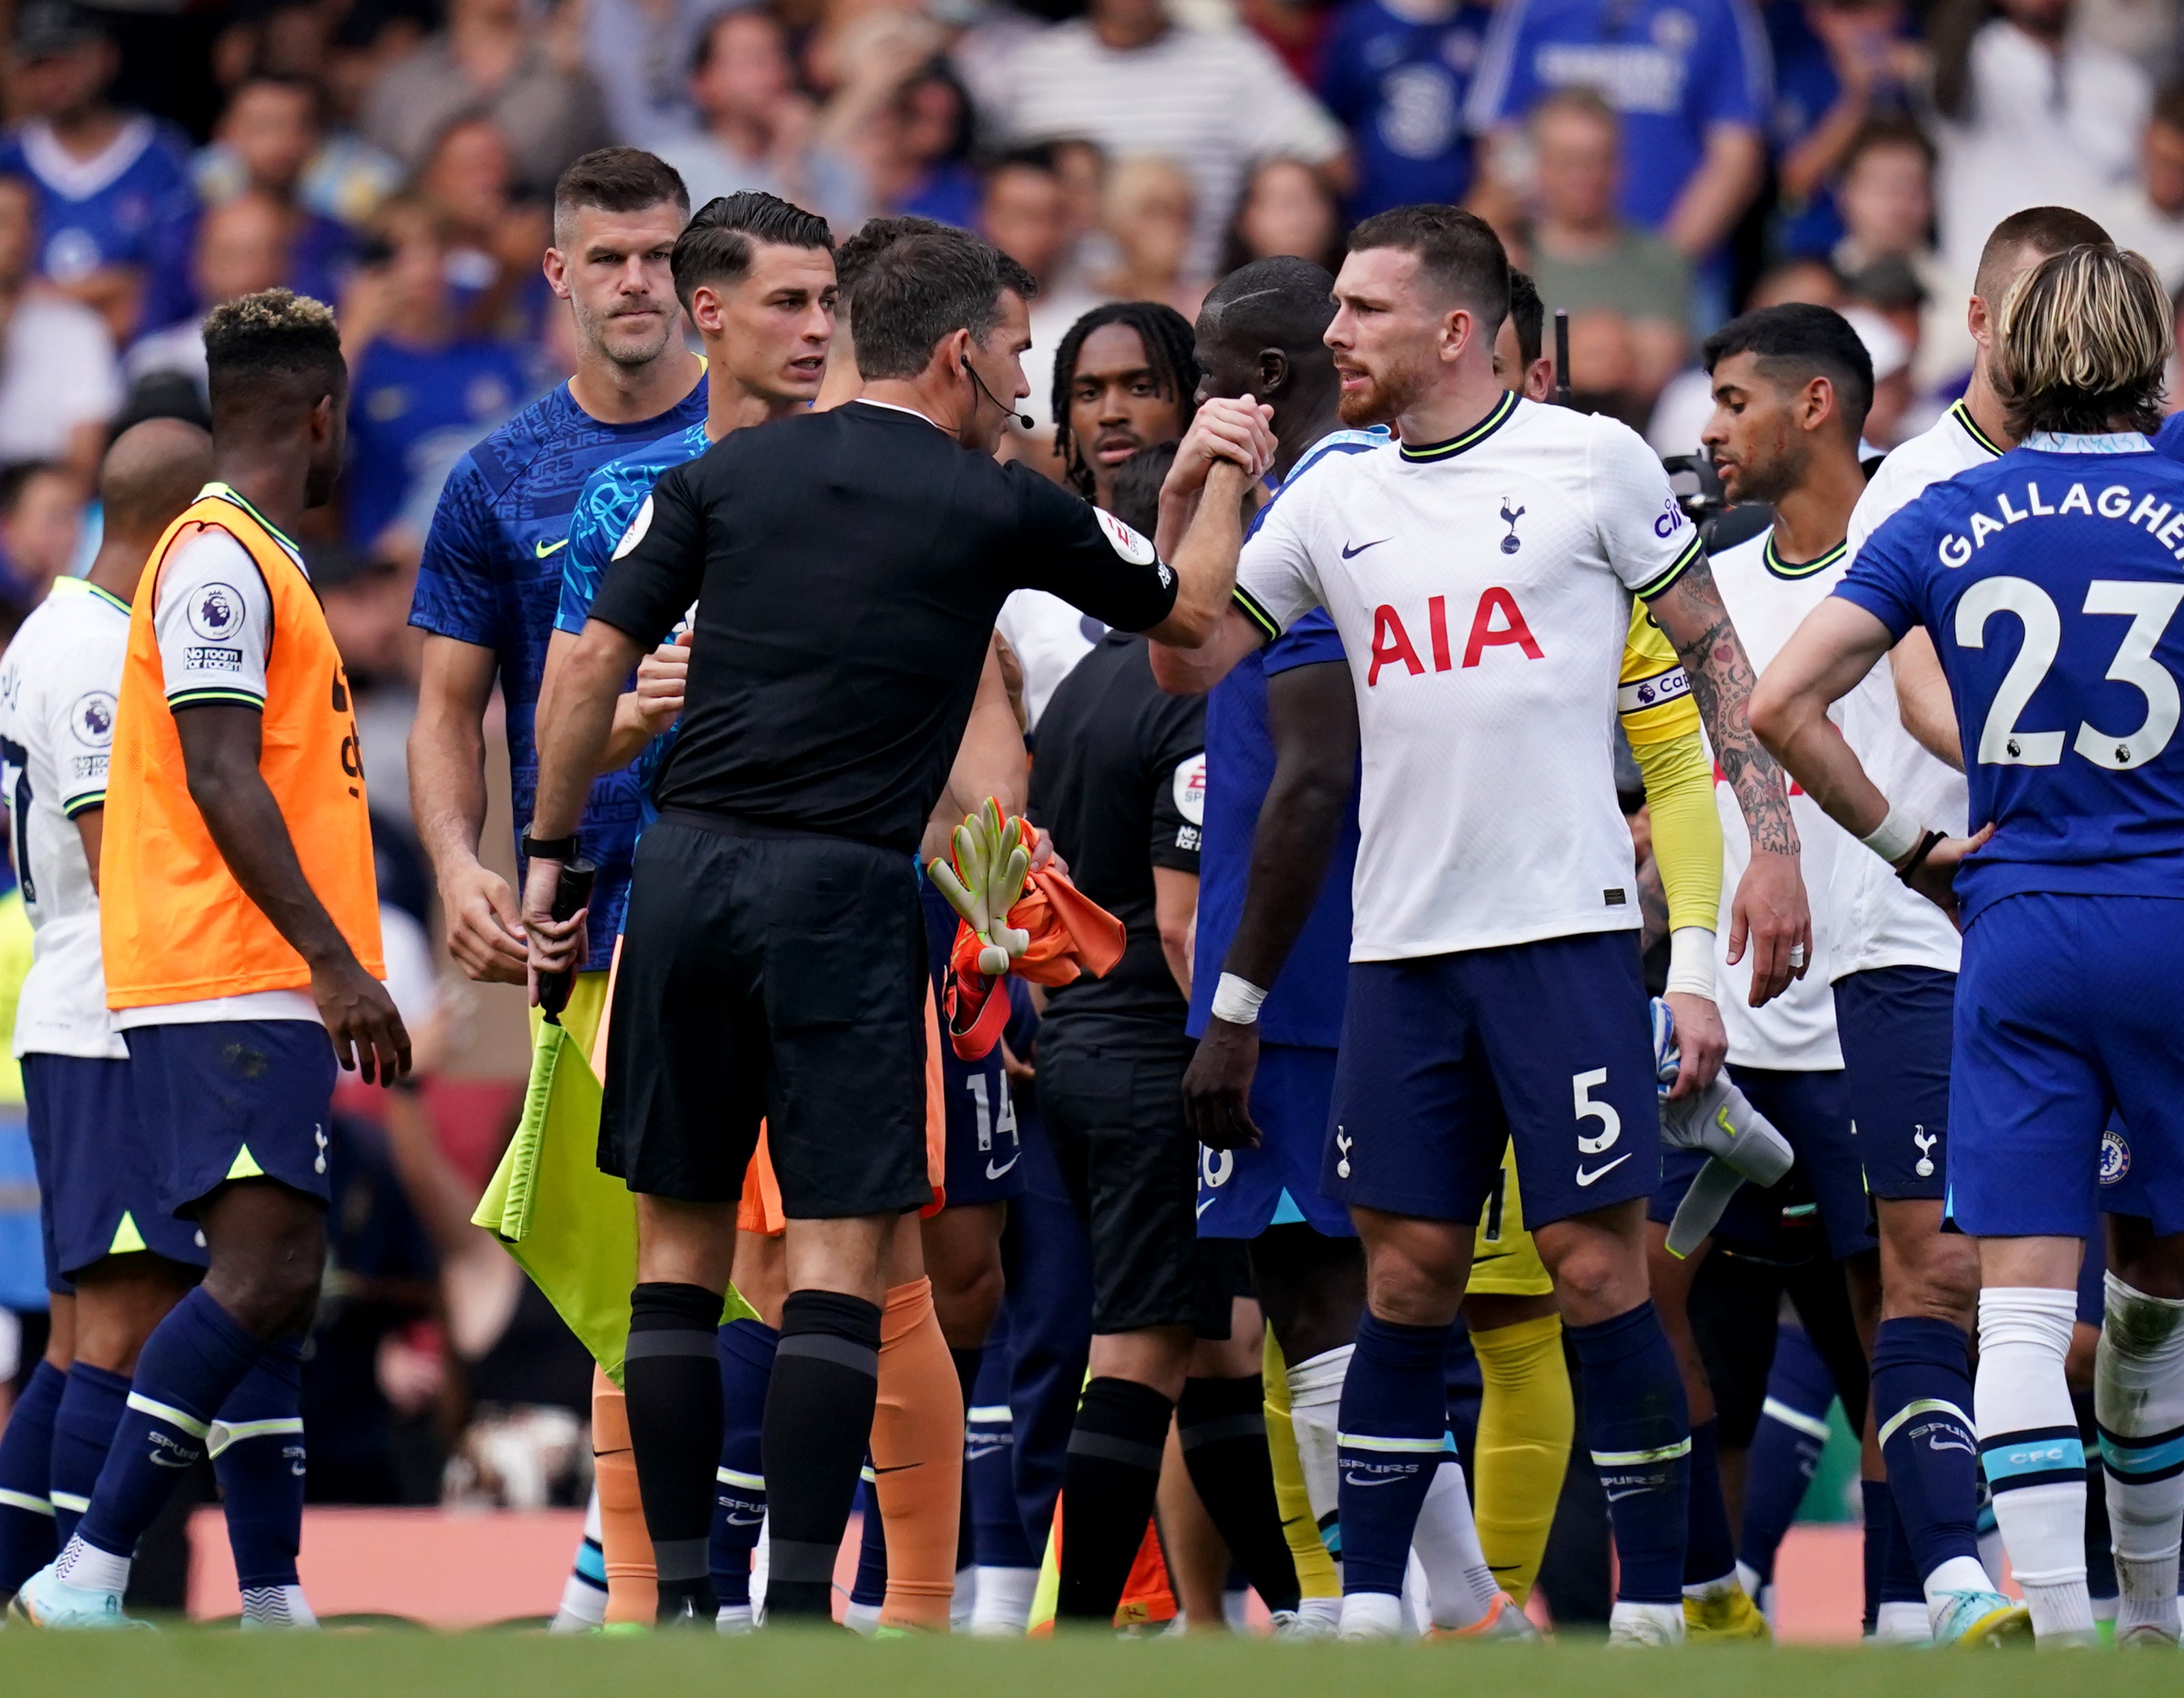 Pierre-Emile Hojbjerg believes Tottenham are in a ‘good way’ after they battled to a 2-2 draw at Chelsea (John Walton/PA)